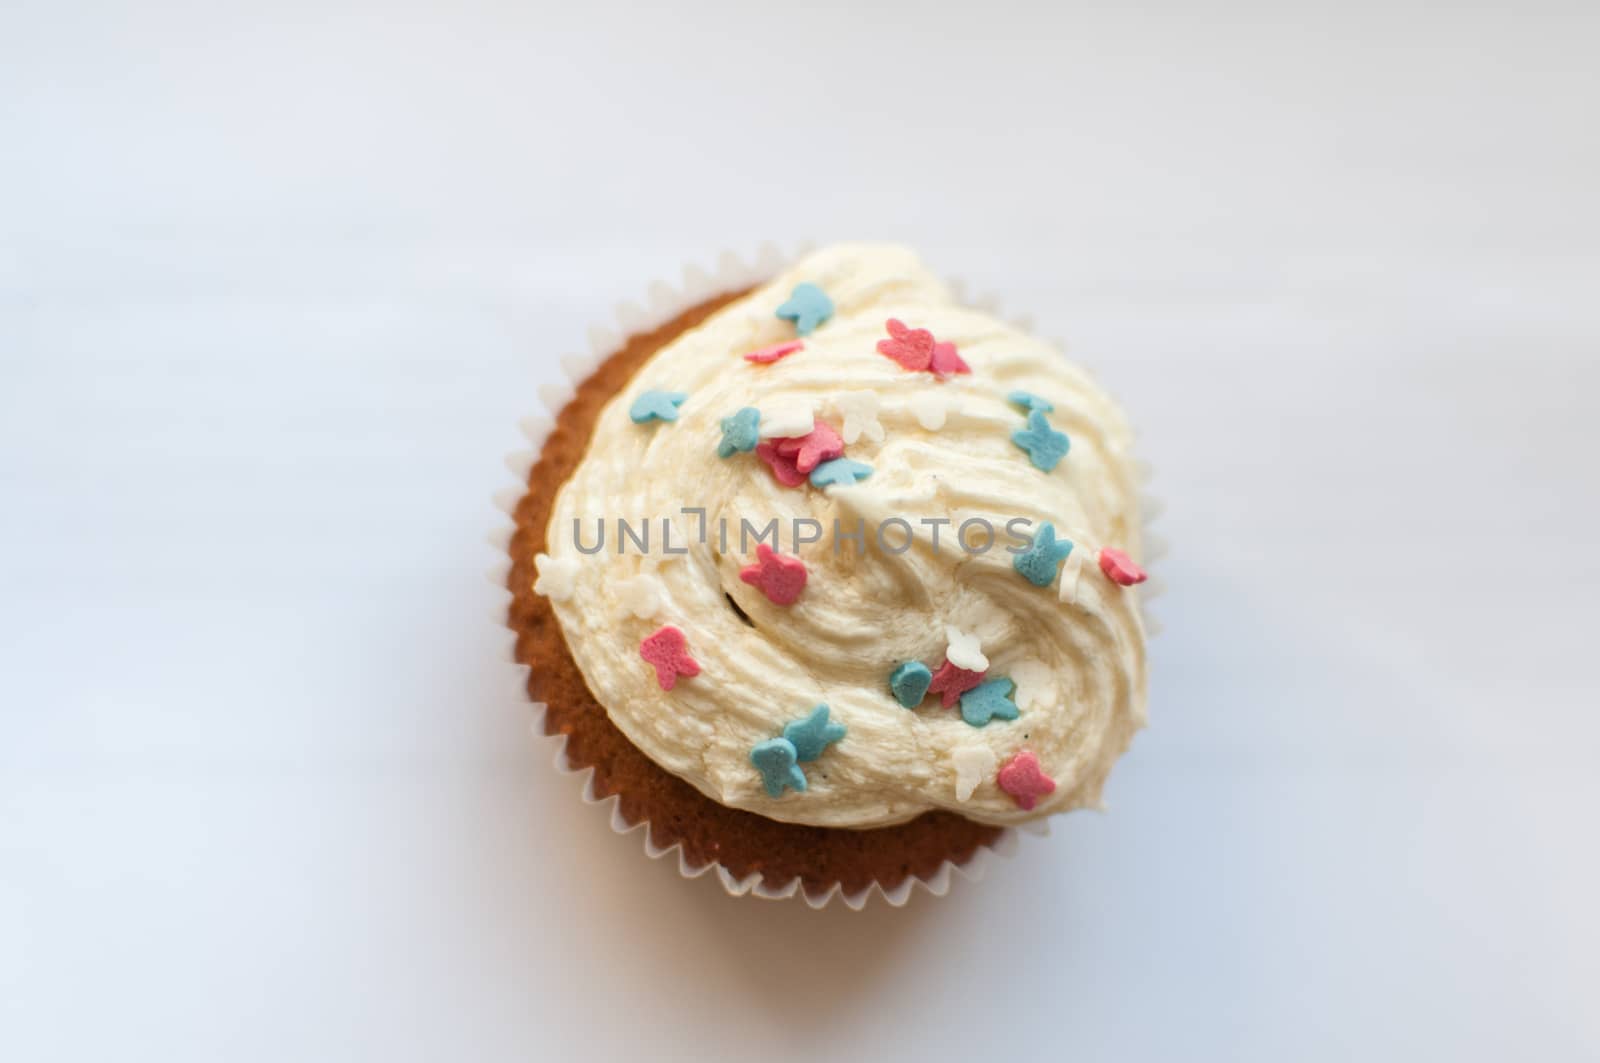 The cupcake with decoration by Linaga